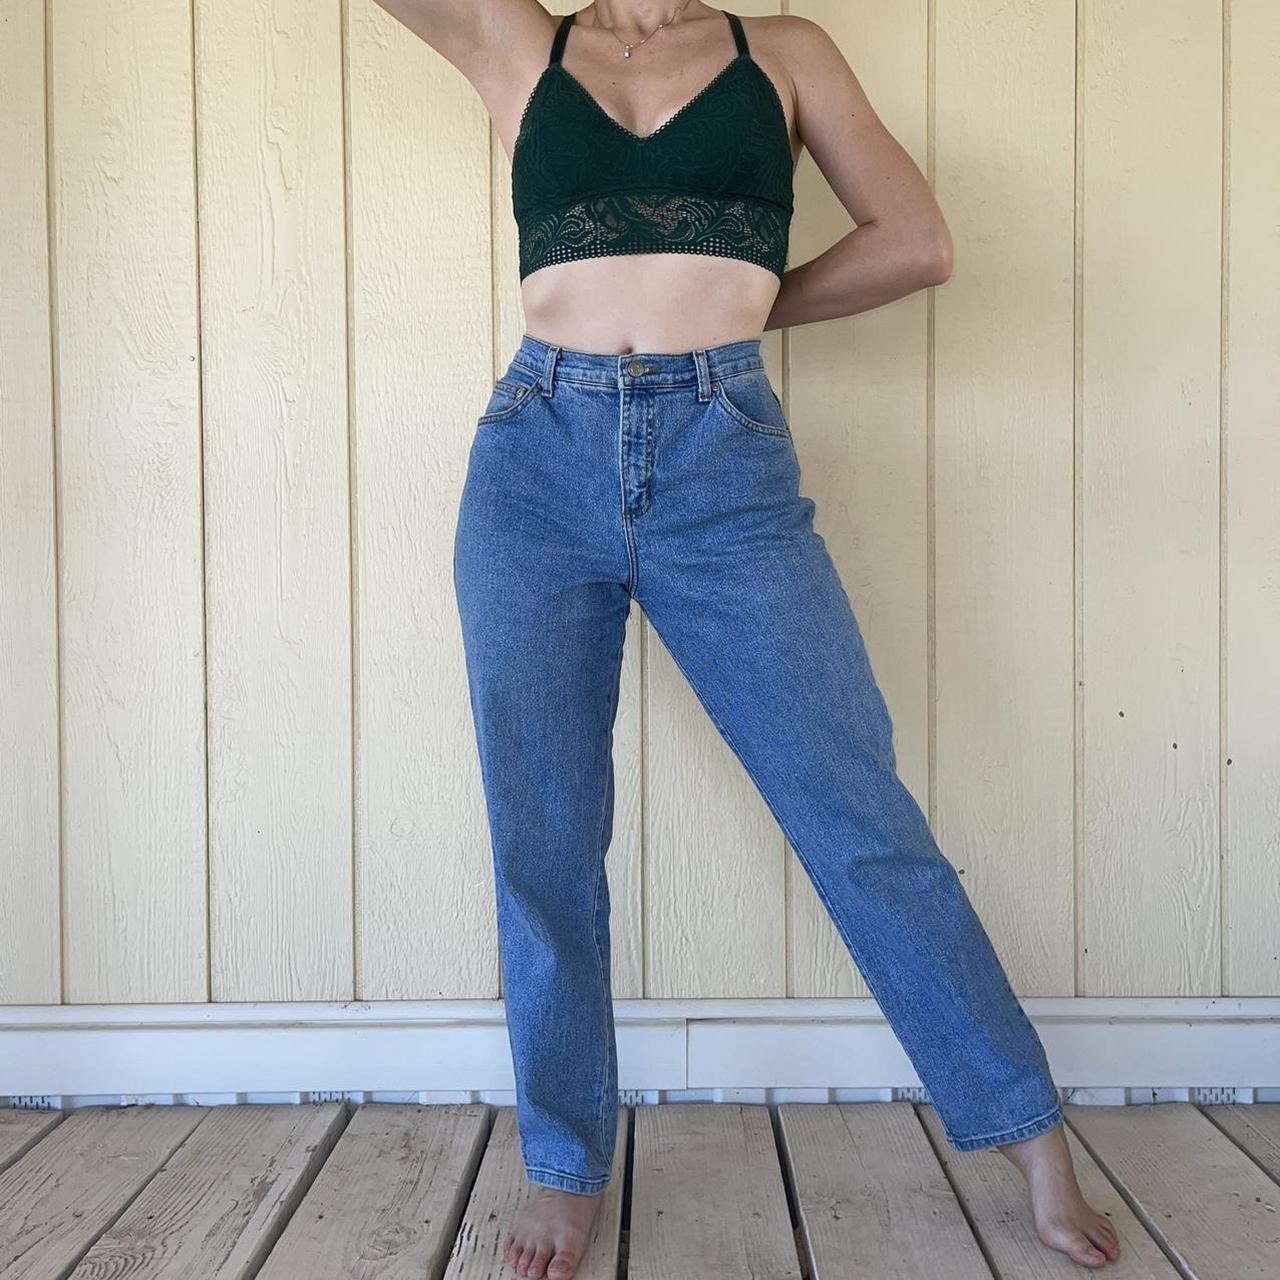 Faded Glory jeans I thrifted : r/VintageFashion